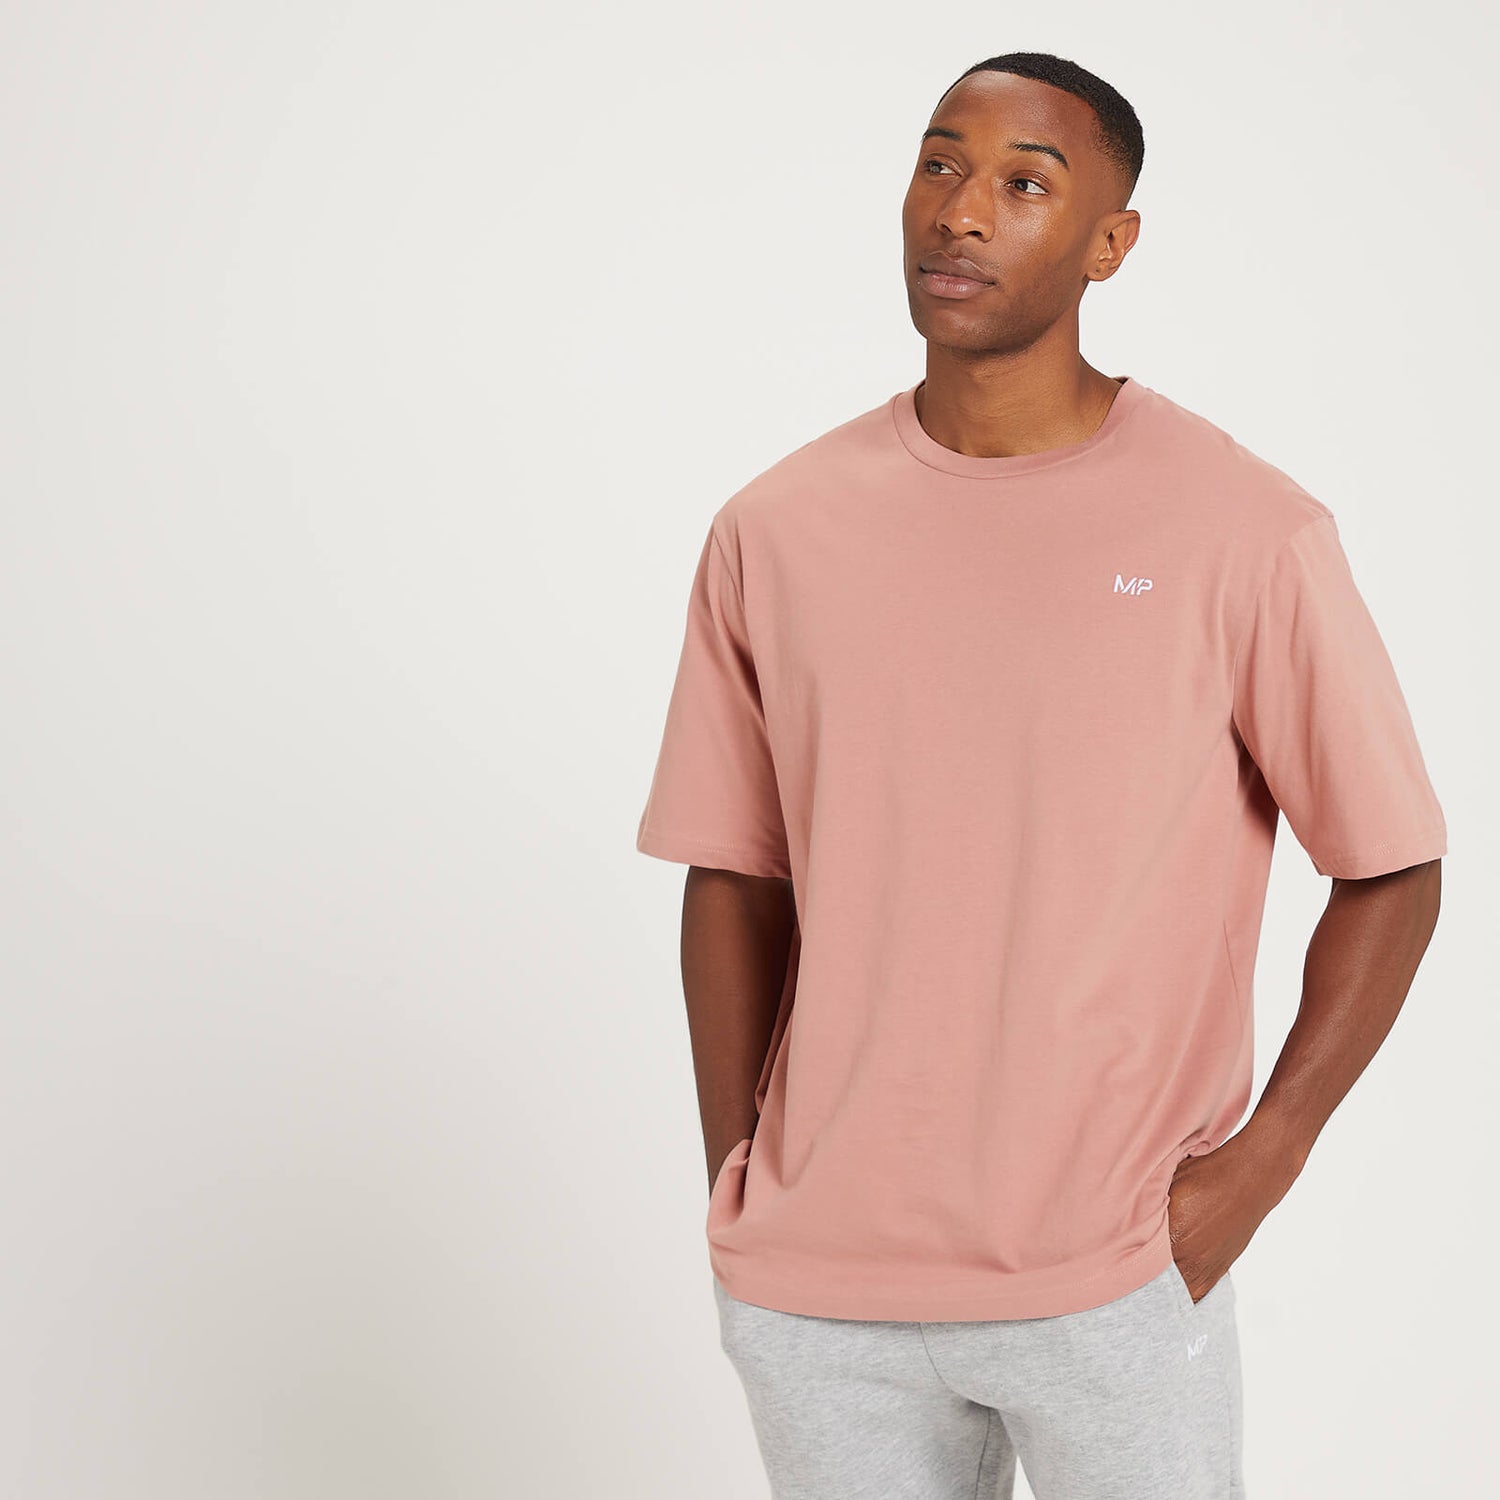 MP Men's Rest Day Oversized T-Shirt - Washed Pink - M